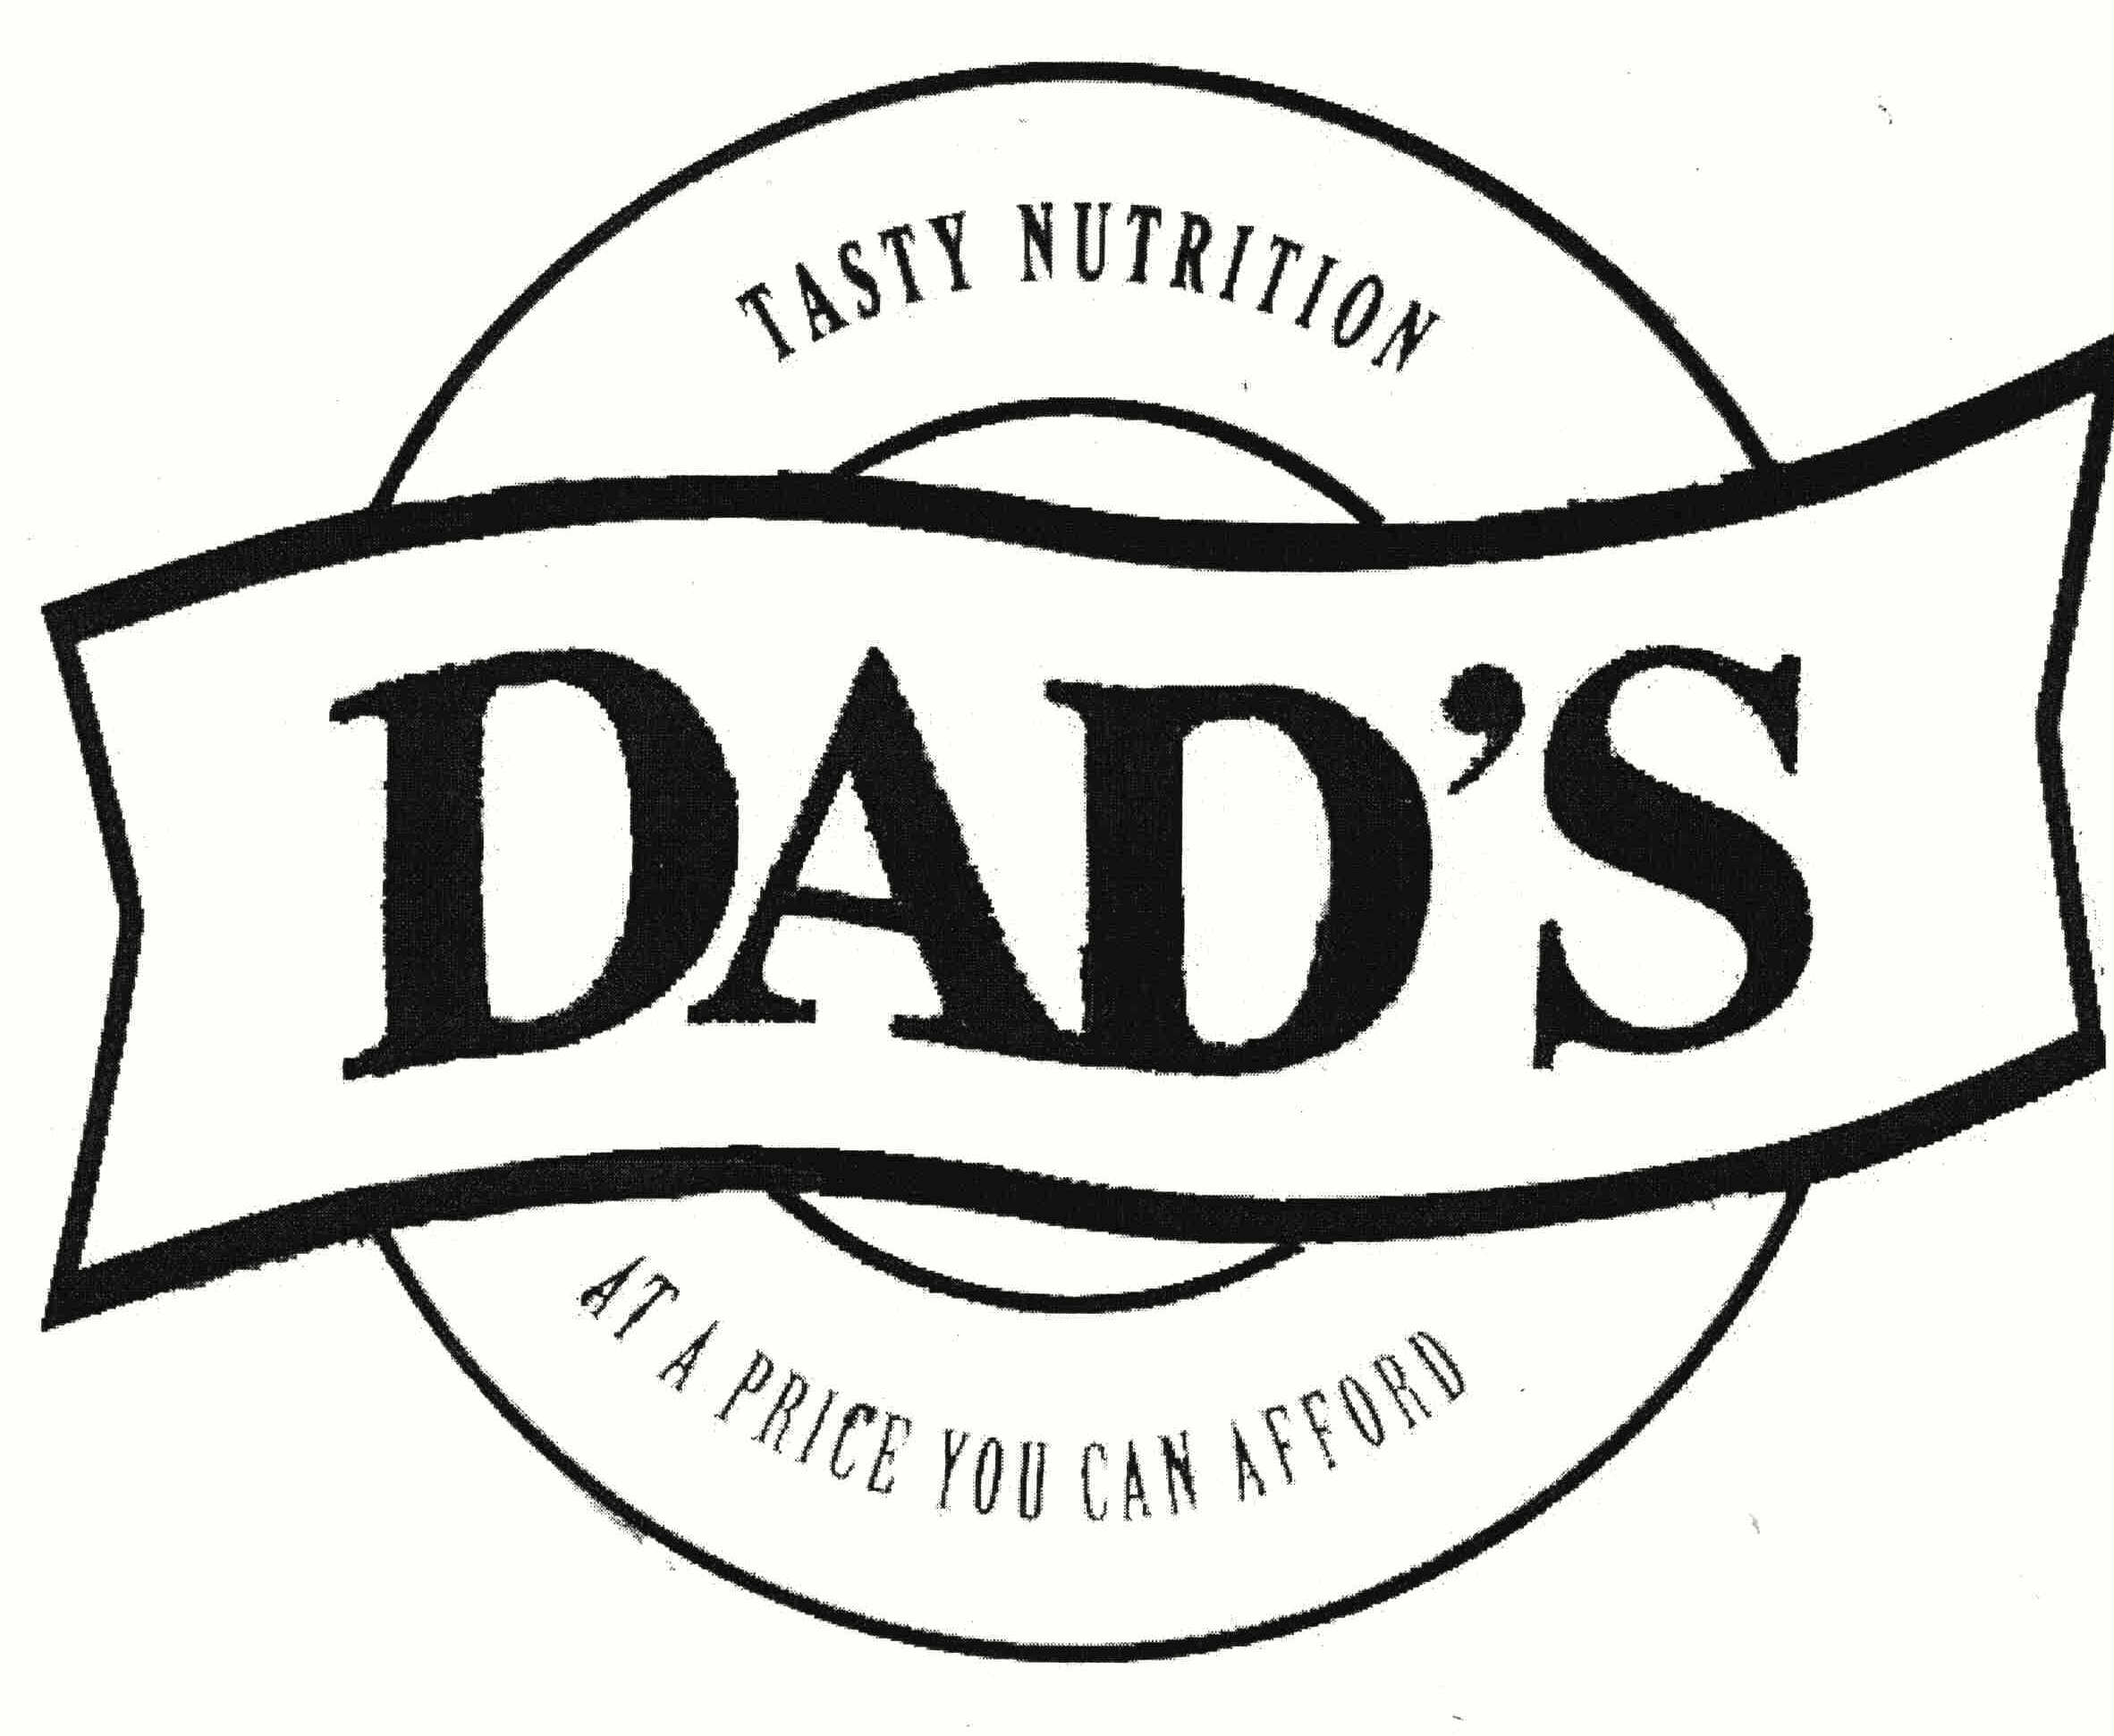  DAD'S TASTY NUTRITION AT A PRICE YOU CAN AFFORD